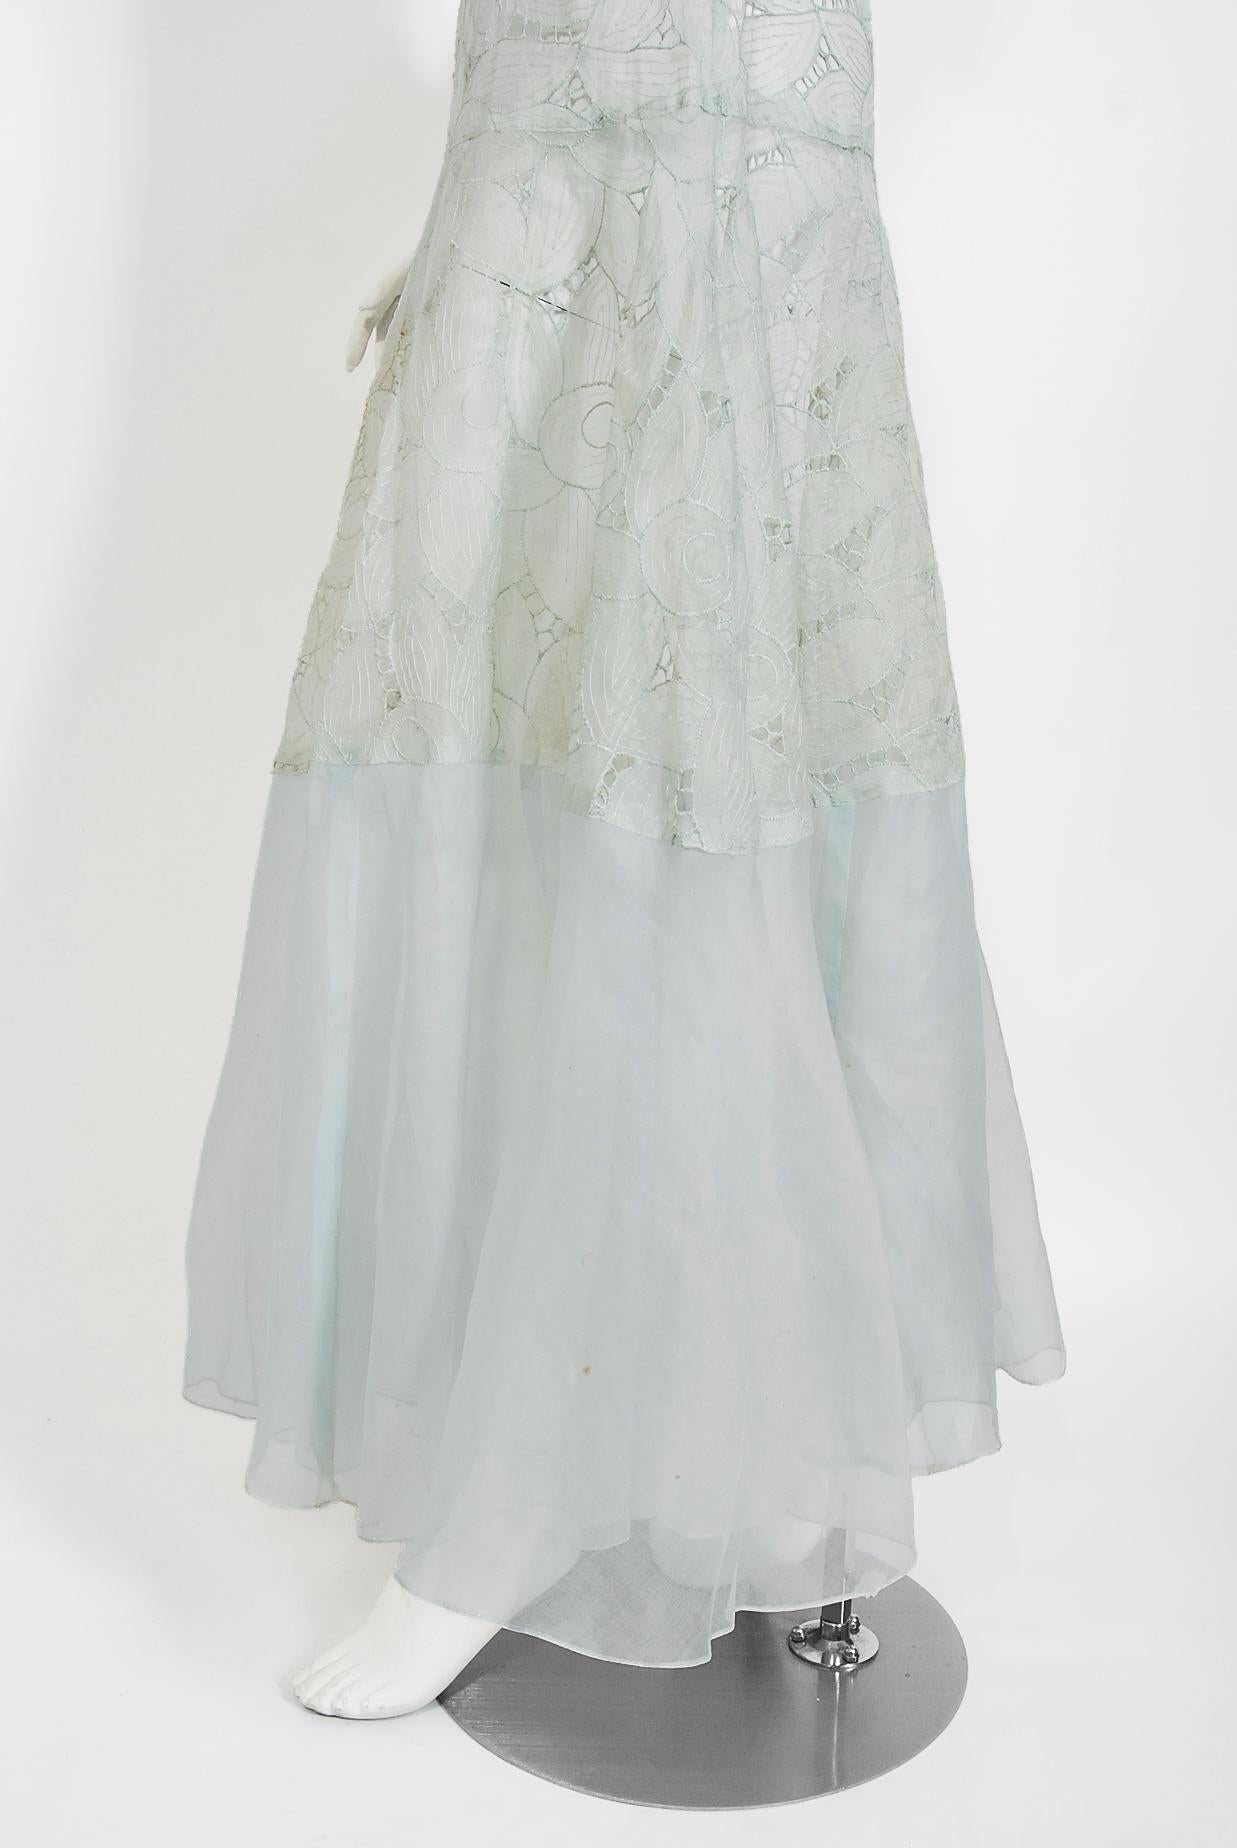 Vintage 1930's Light Blue Sheer Floral Embroidered Organza Winged-Sleeve Gown 3